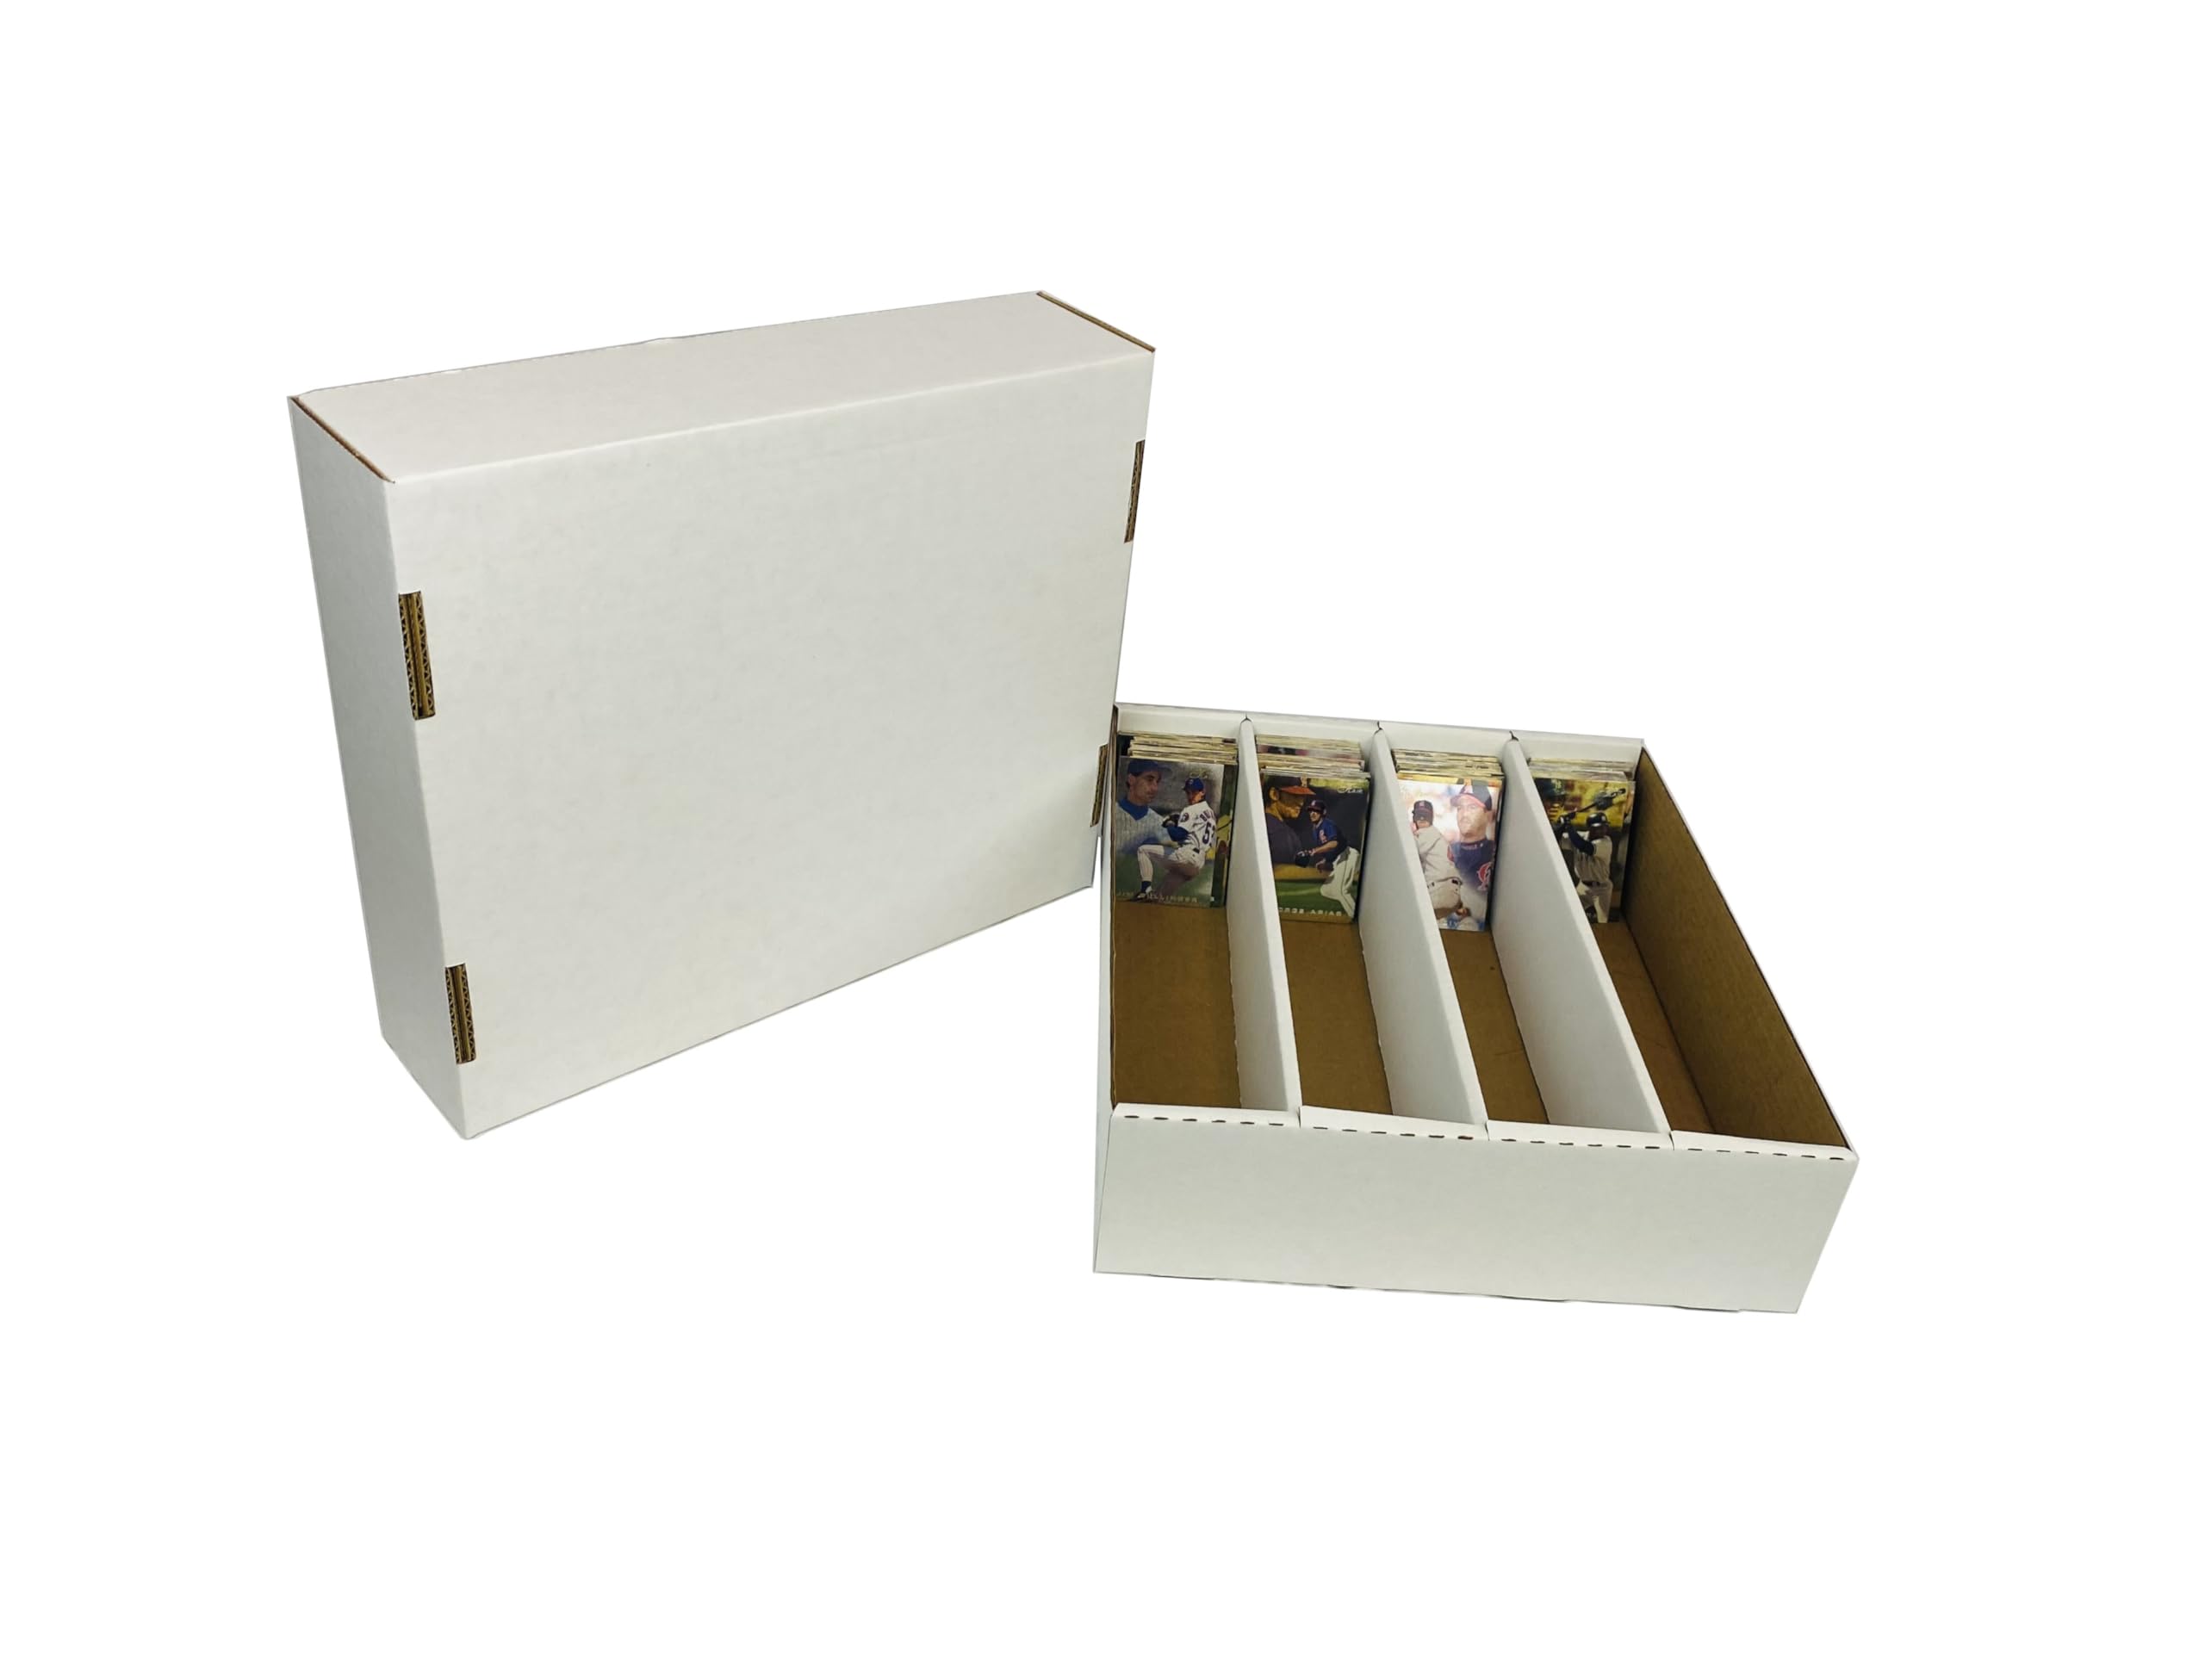 3) Max Protection 4 Row Trading card Storage Box - Durable cardboard Box  for Sports, card collection - 200 lb Test Strength, Fu